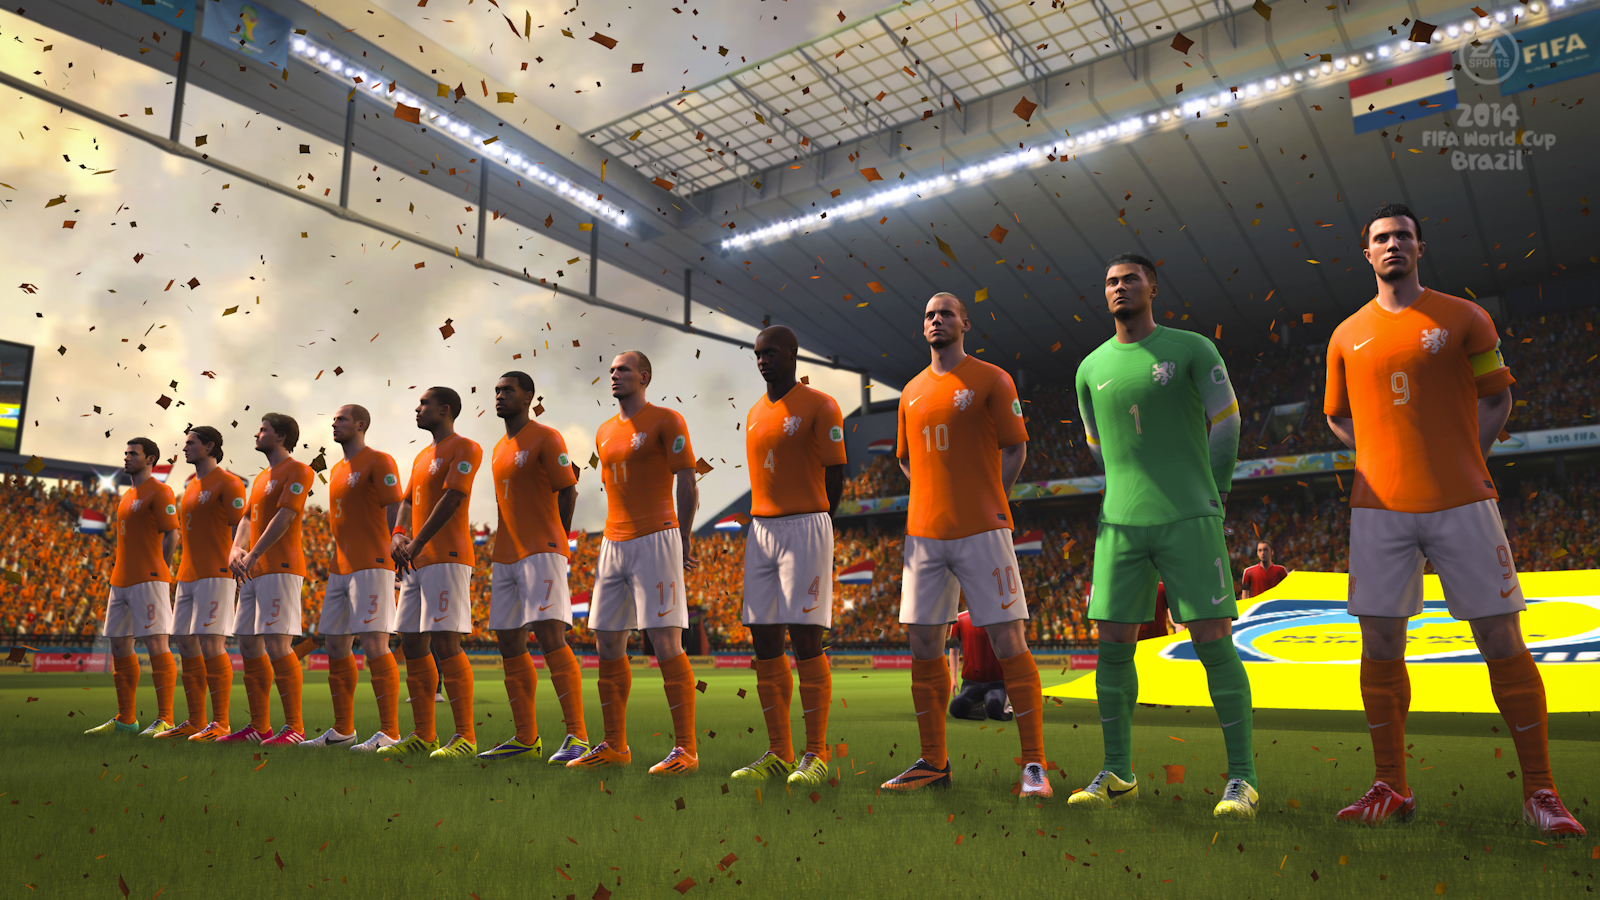 2014 FIFA World Cup Brazil demo is out now, event still not taking place  until June - GameSpot